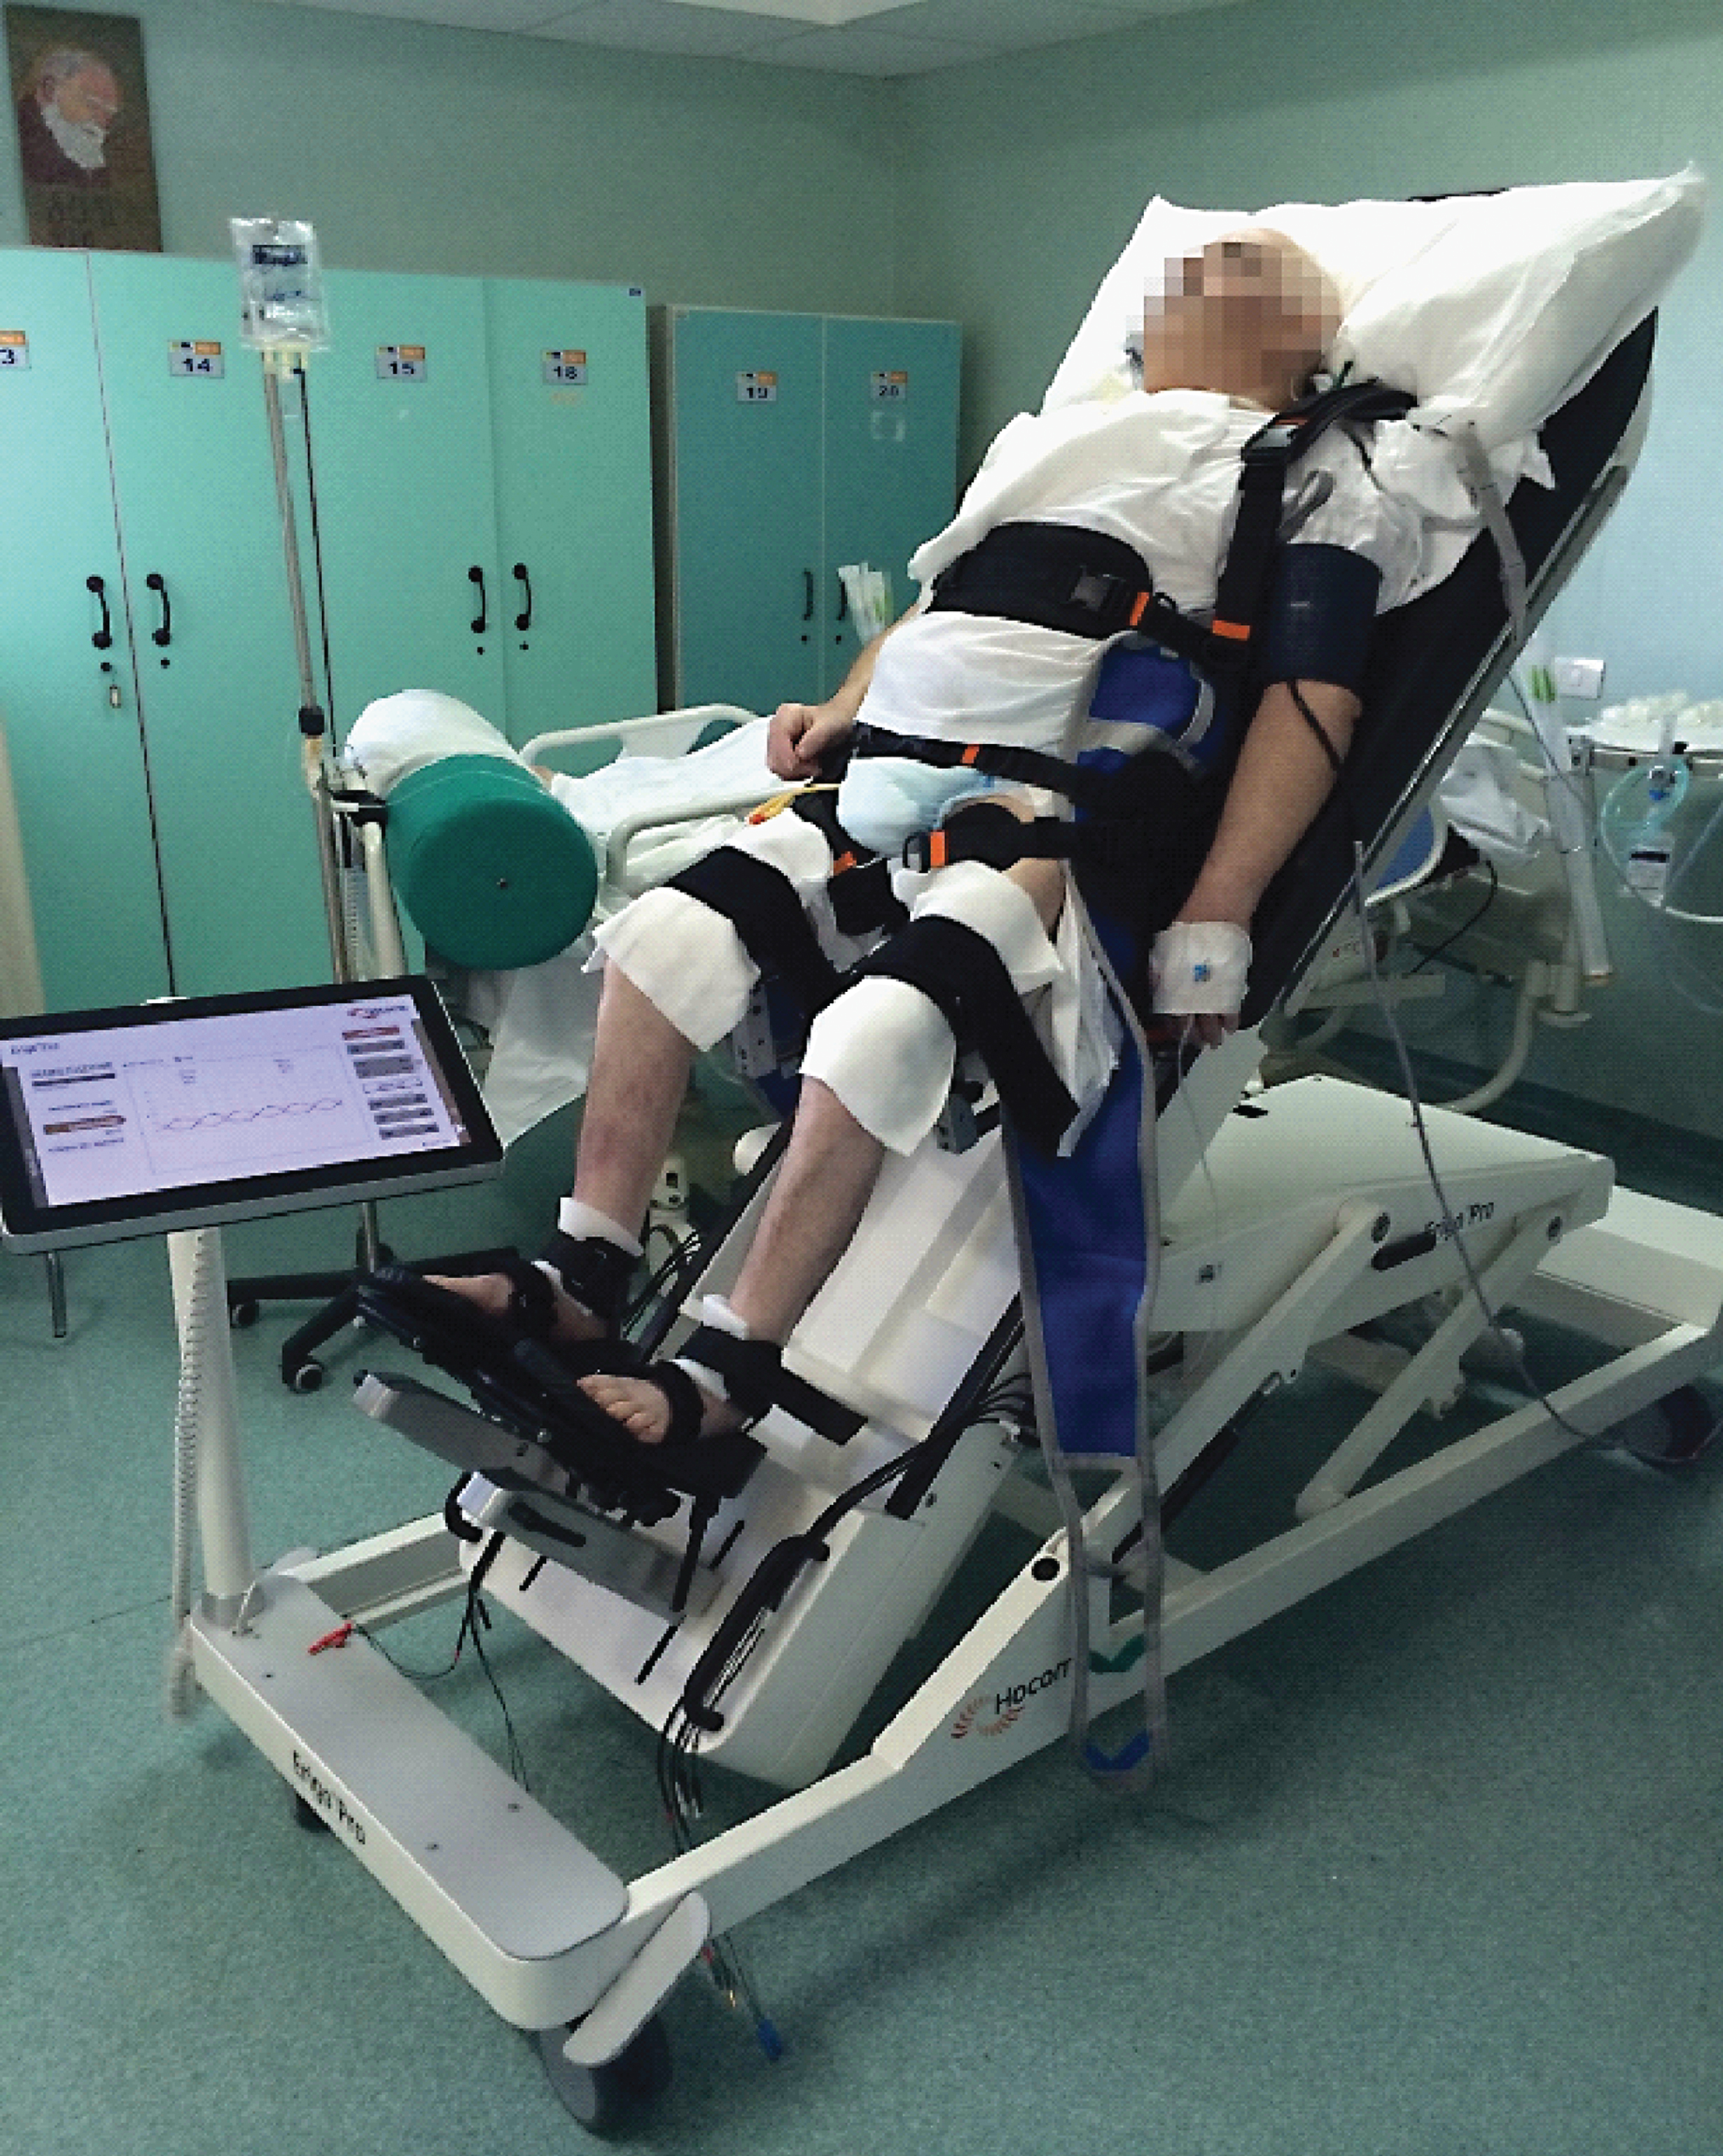 ERIGO device combines progressive verticalization, cyclic leg movements in combination with step synchronized muscle functional electric stimulation at lower limb (that allow stepping reinforcement), and body weight loading, in an attempt to ensure the safe stabilization in the upright position of the patient.